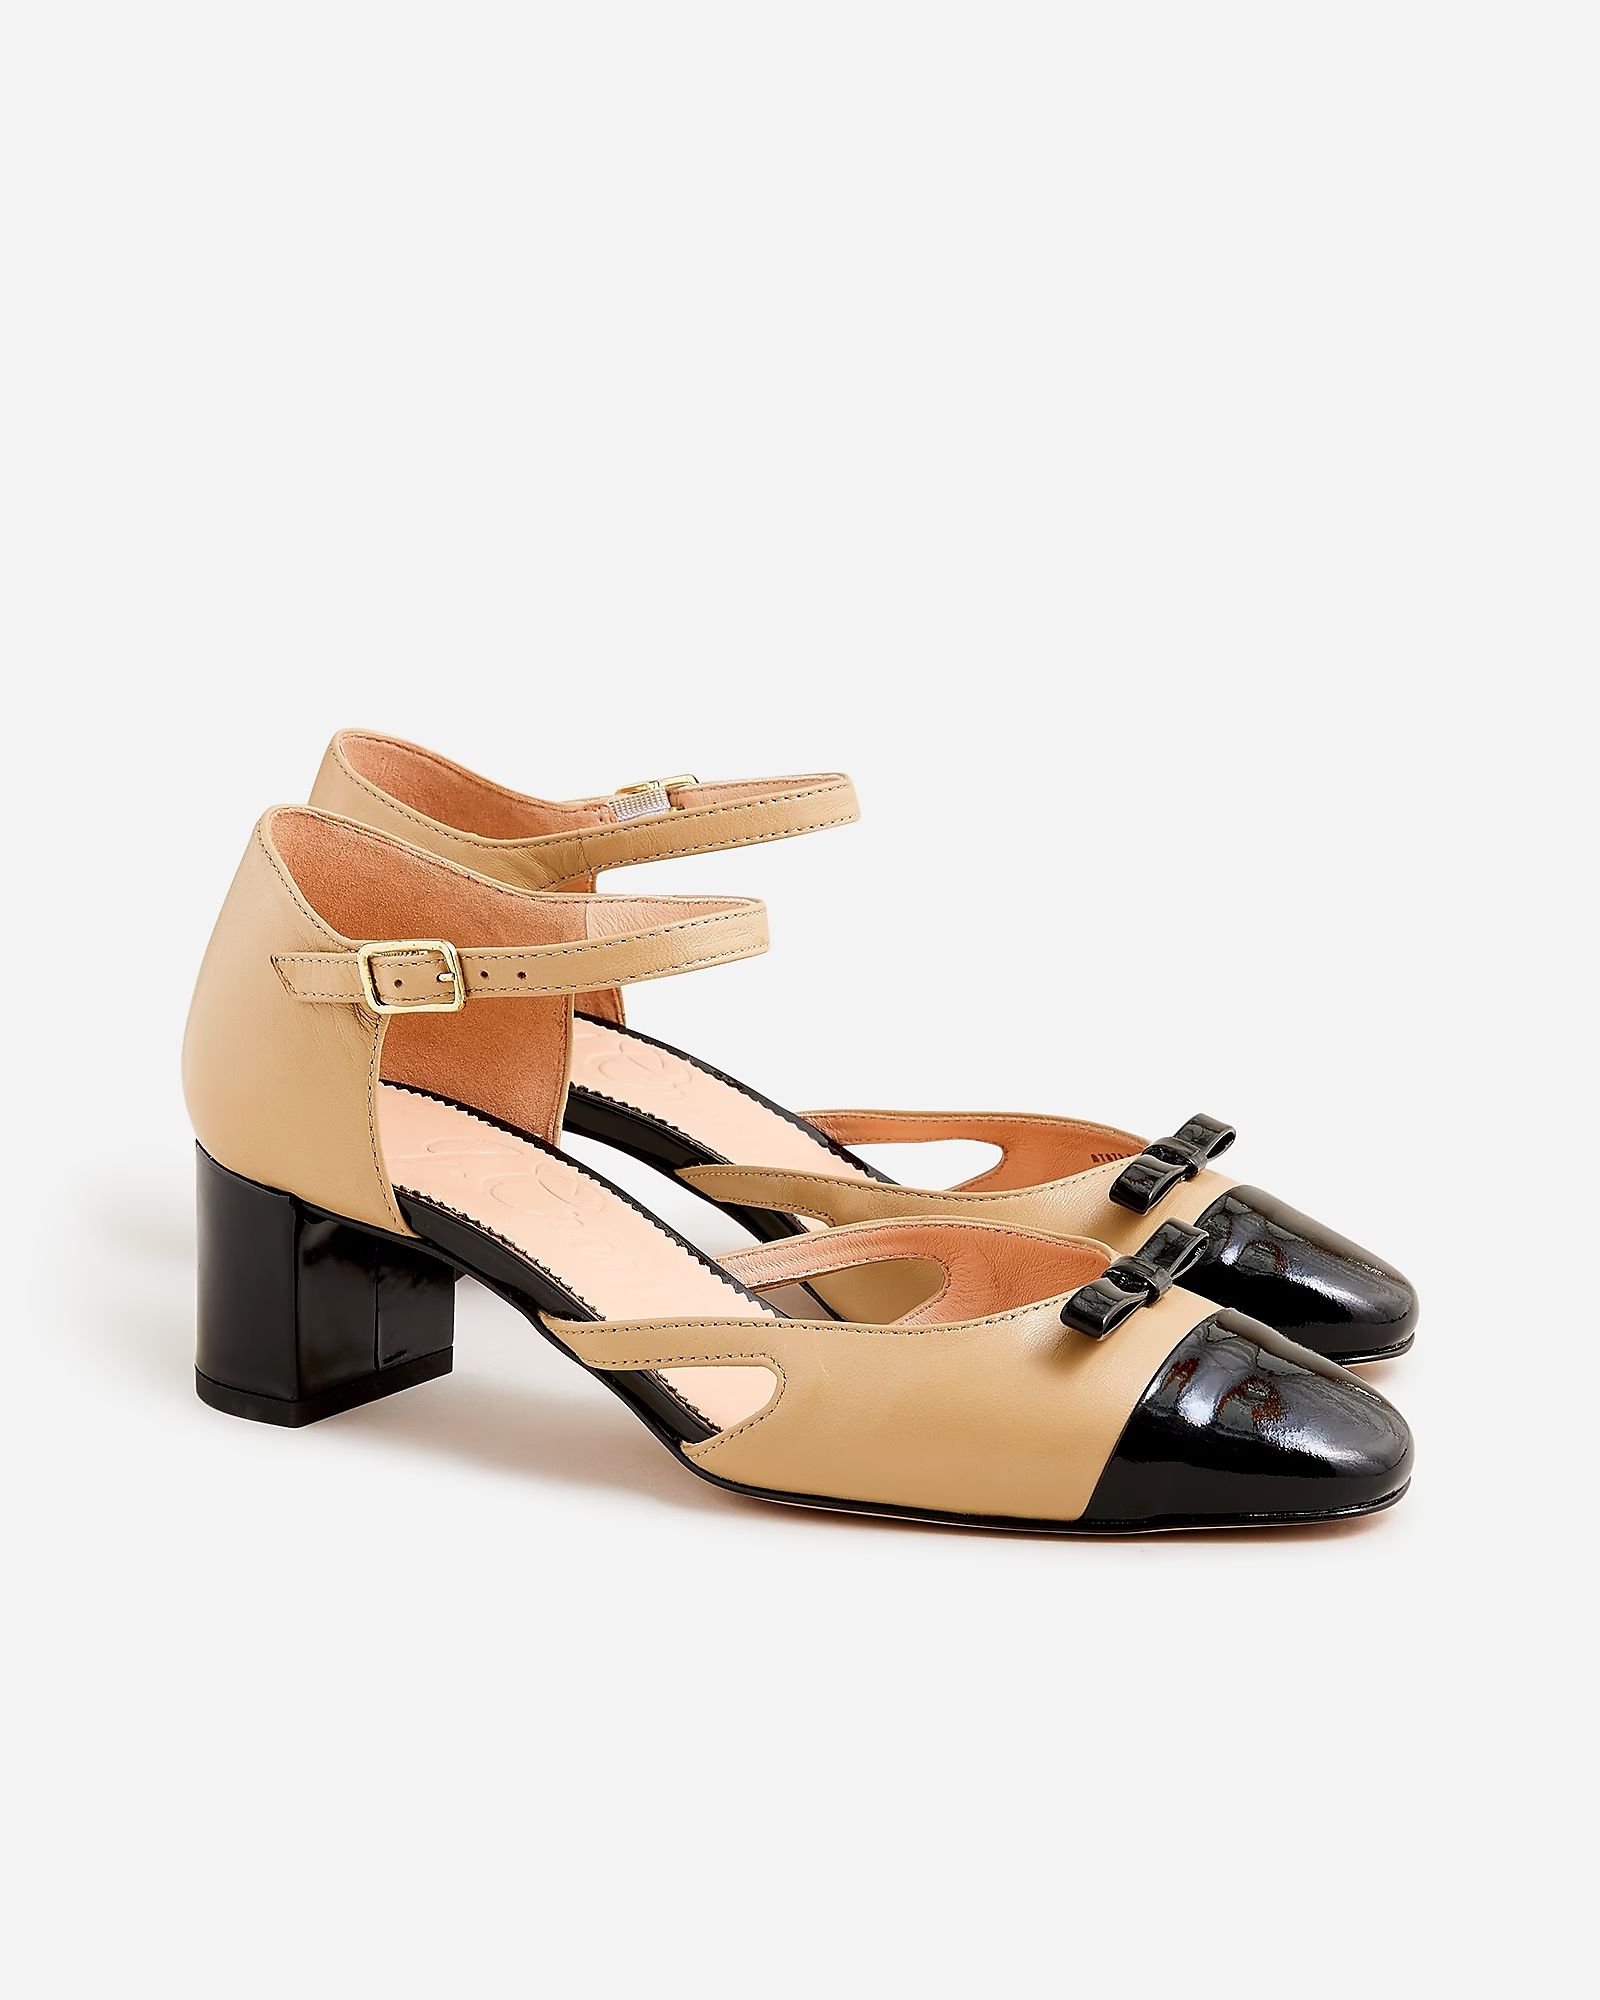 Millie ankle-strap cutout heels in leather | J.Crew US